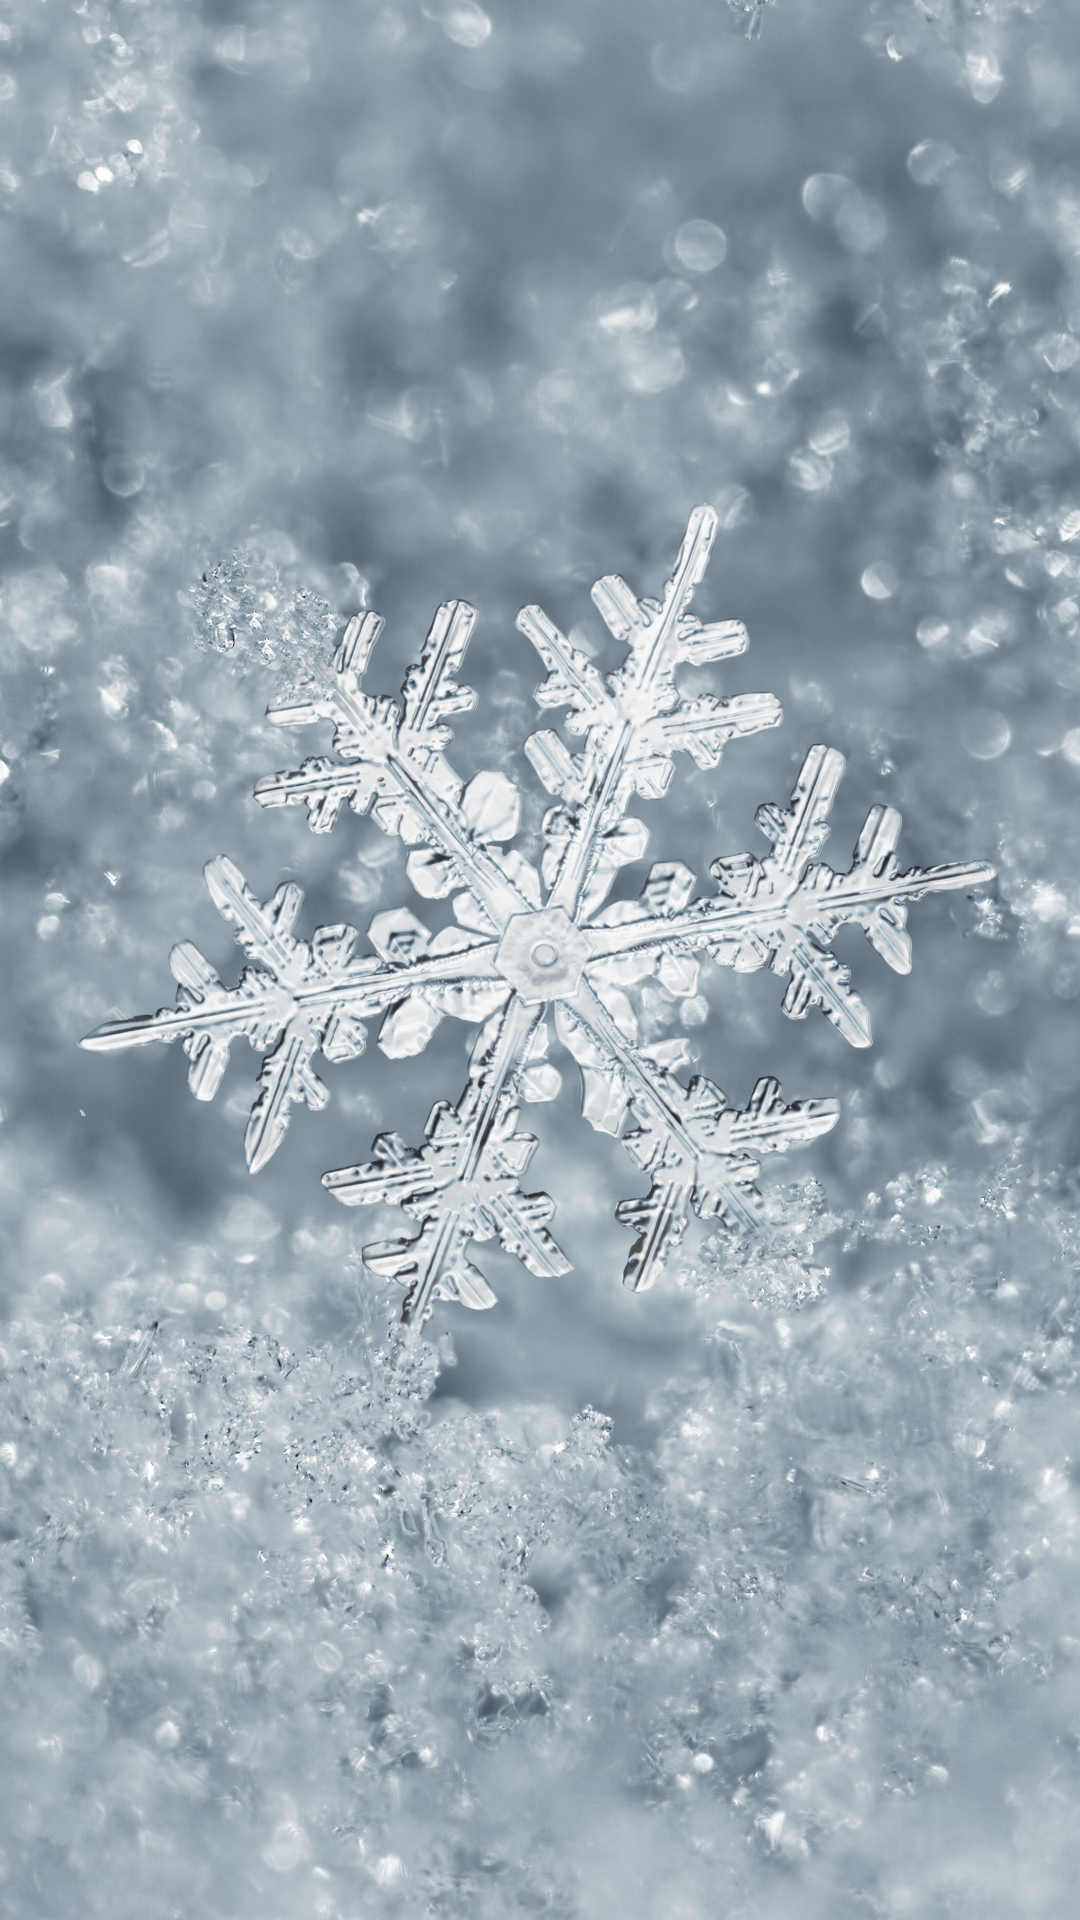 Ice Snowflake iPhone 7 Plus Wallpaper | Gallery Yopriceville - High-Quality Images and ...